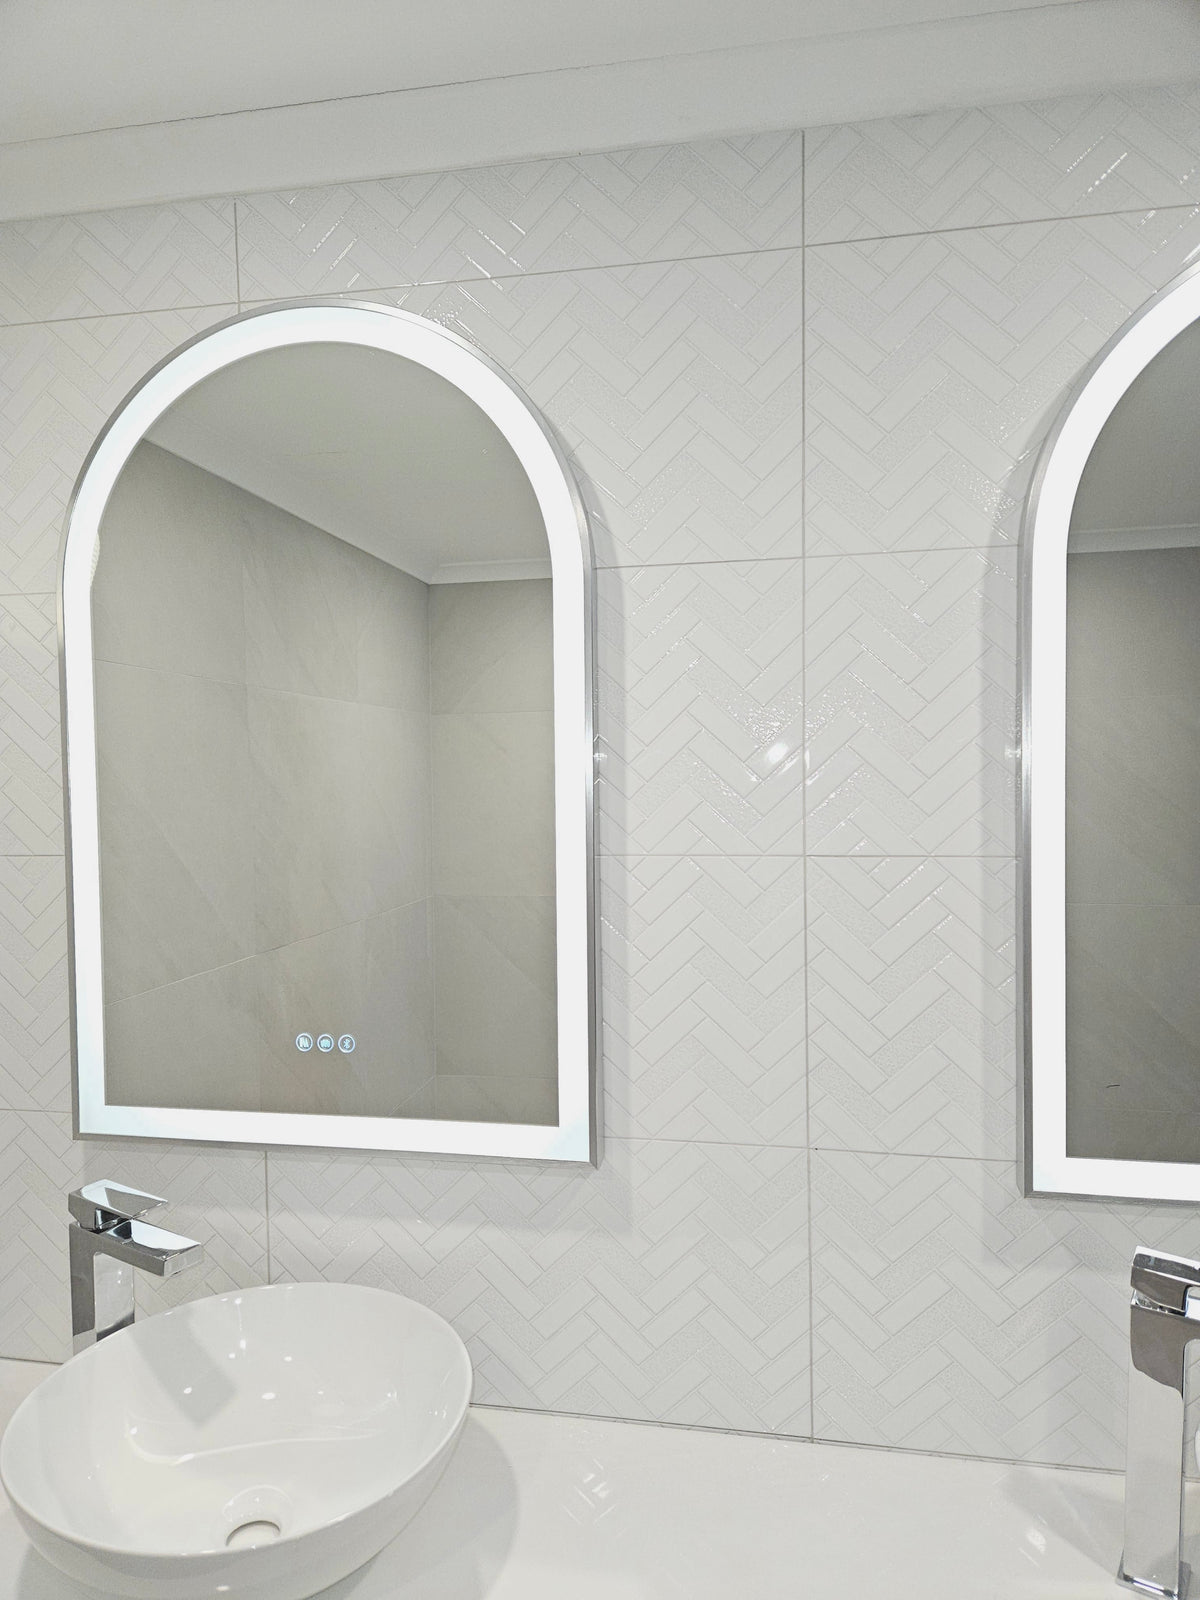 Double Smart LED Mirrors with Arch-shaped design in elegant white-on-white bathroom.